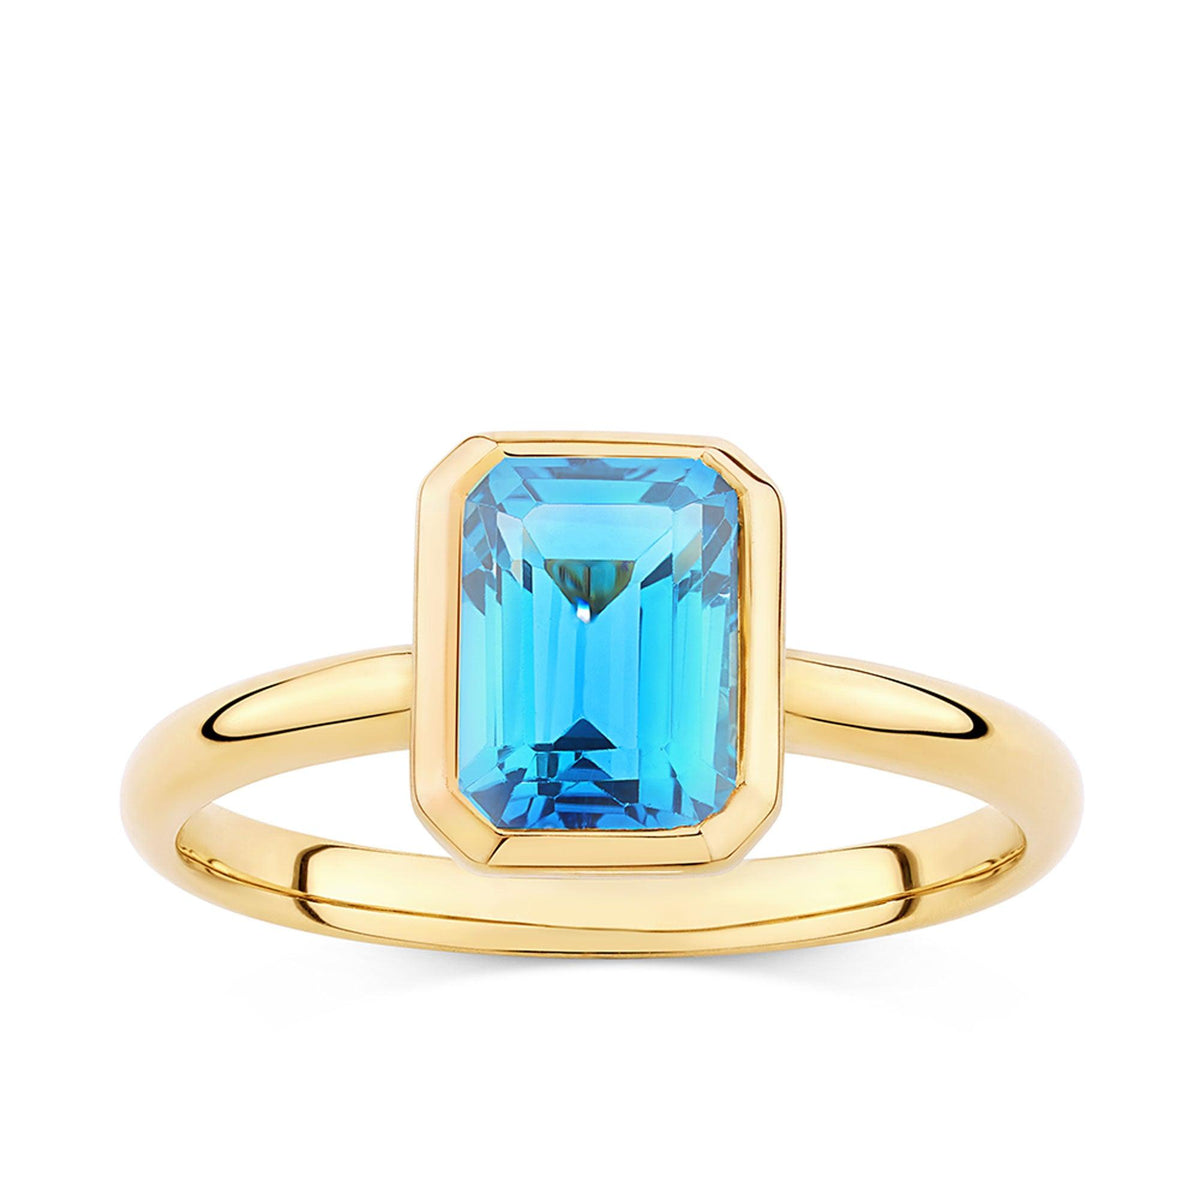 Blue Topaz Emerald Cut Ring in 9ct Yellow Gold - Wallace Bishop